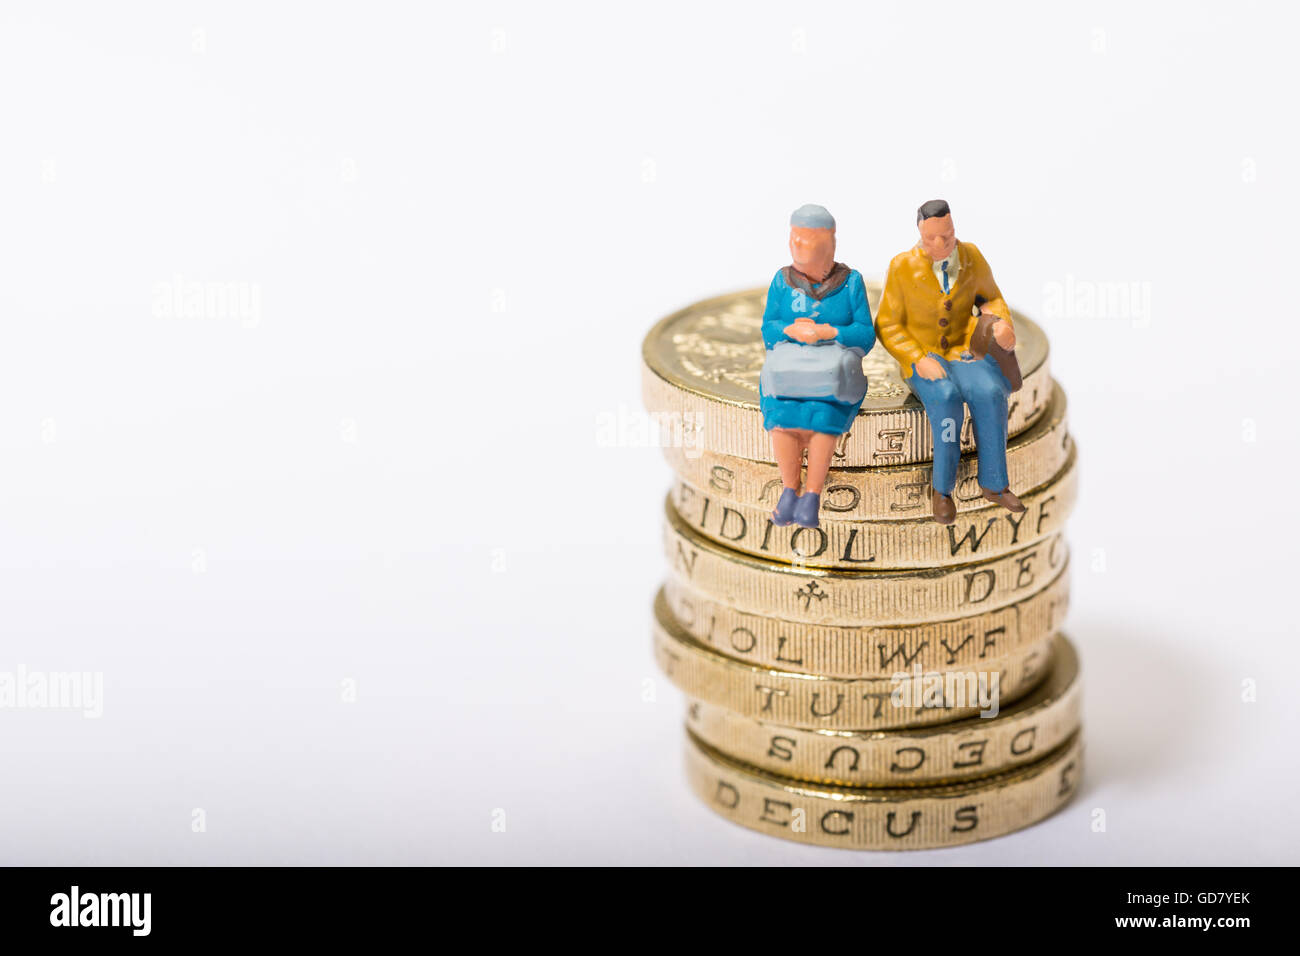 Concept image of two pensioners sat on a pile of pound coins Stock Photo